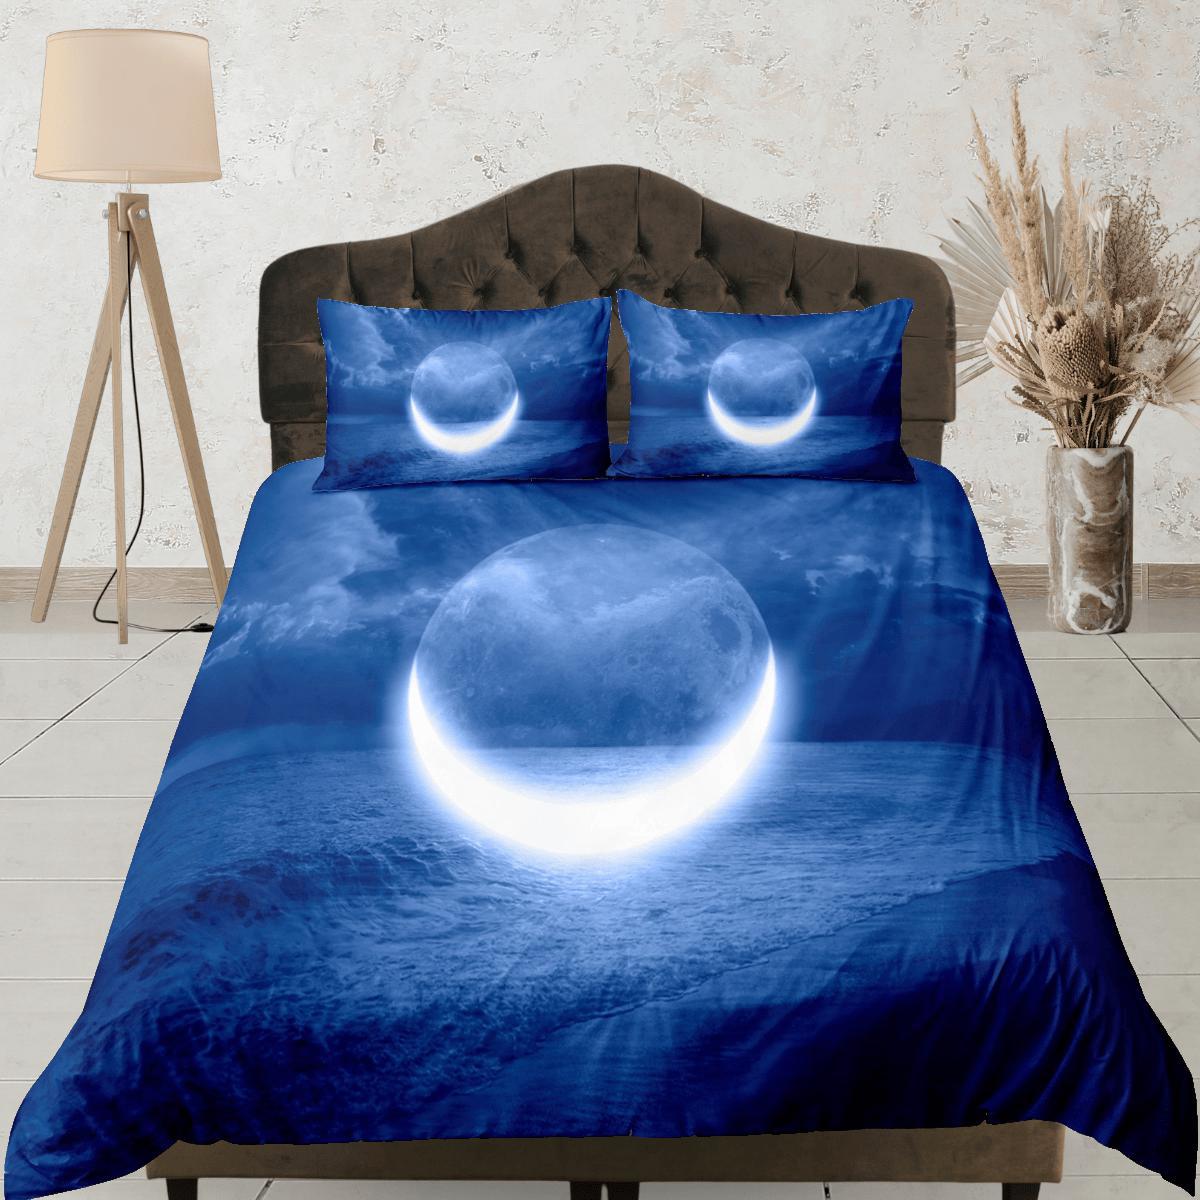 daintyduvet Crescent Moon Night Duvet Cover Set Colorful Bedspread, Dorm Bedding with Pillowcase